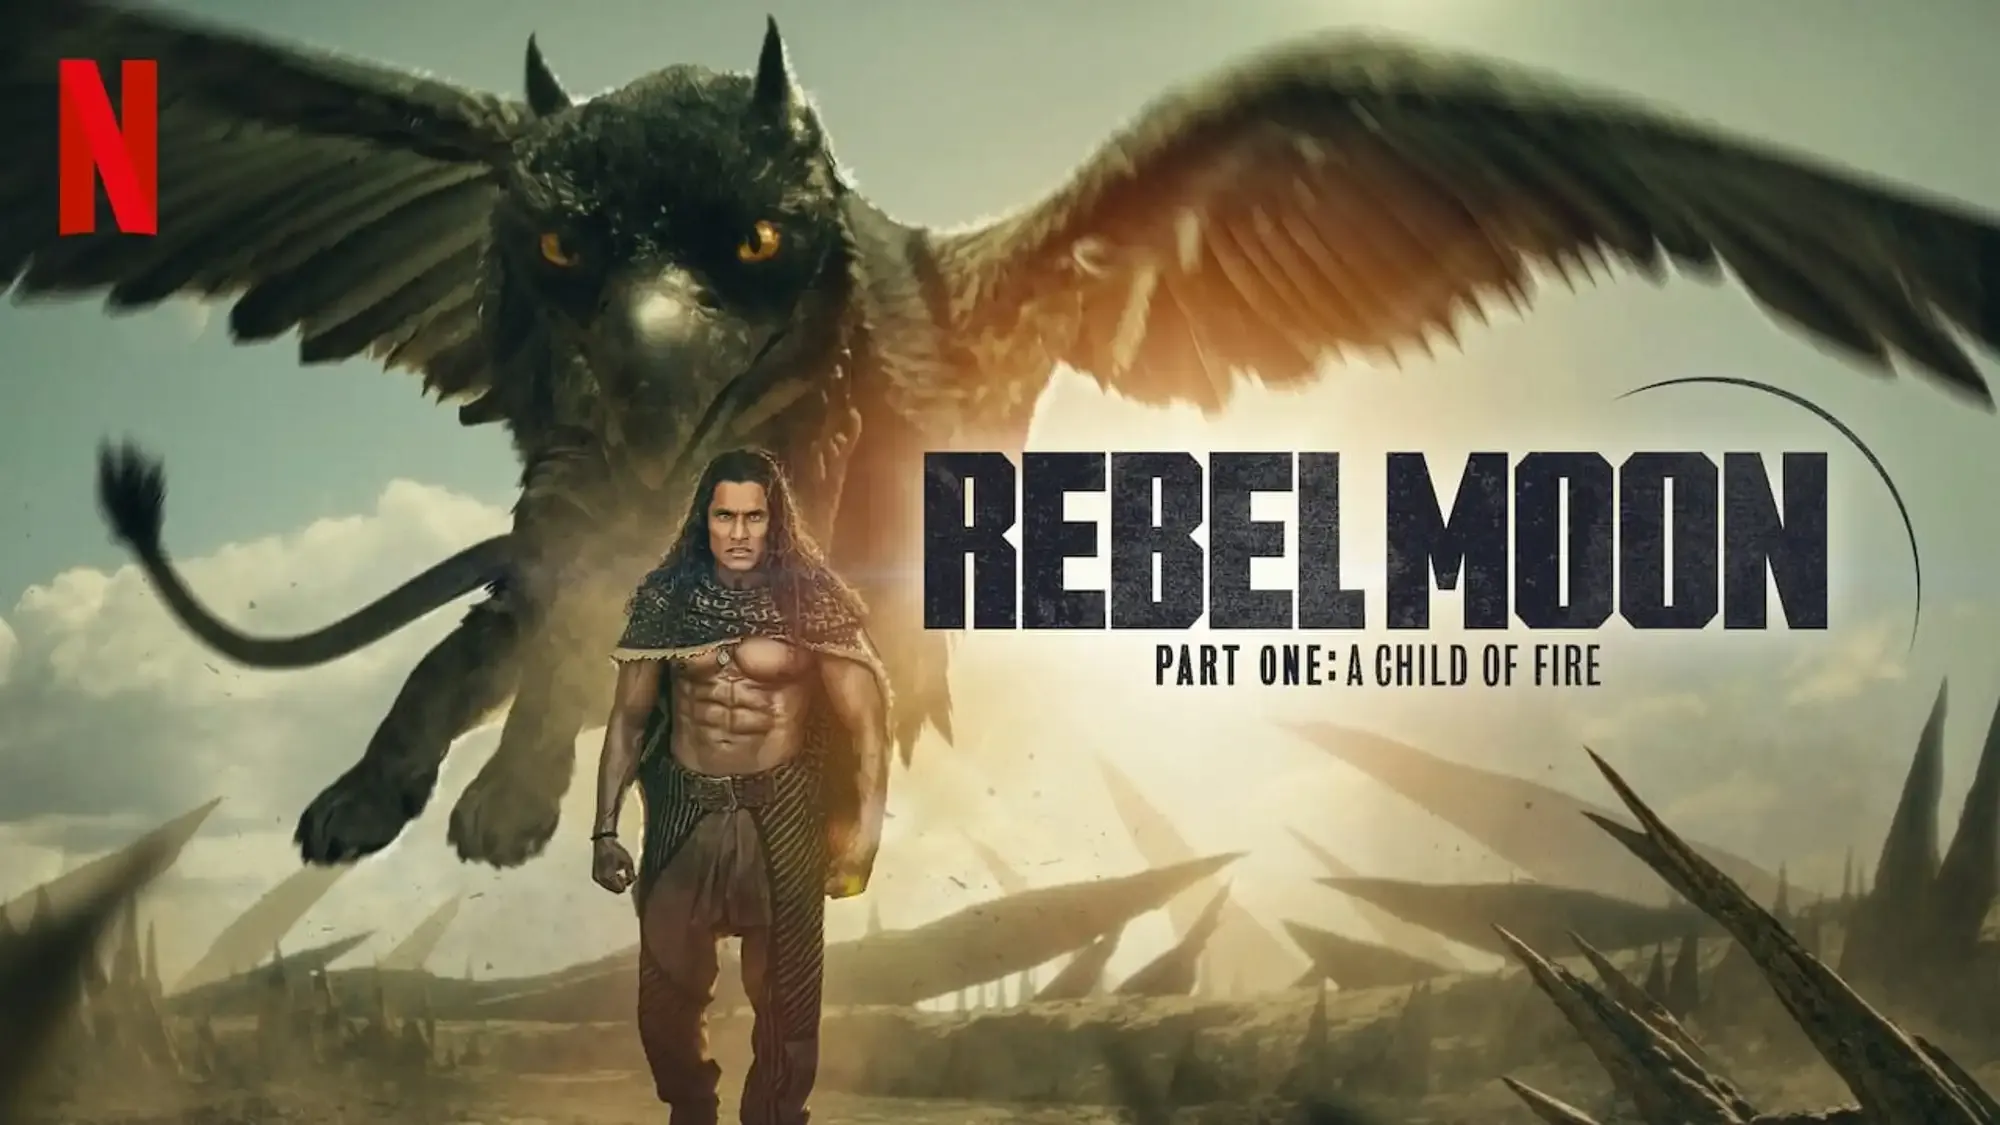 Rebel Moon - Part One: A Child of Fire movie review